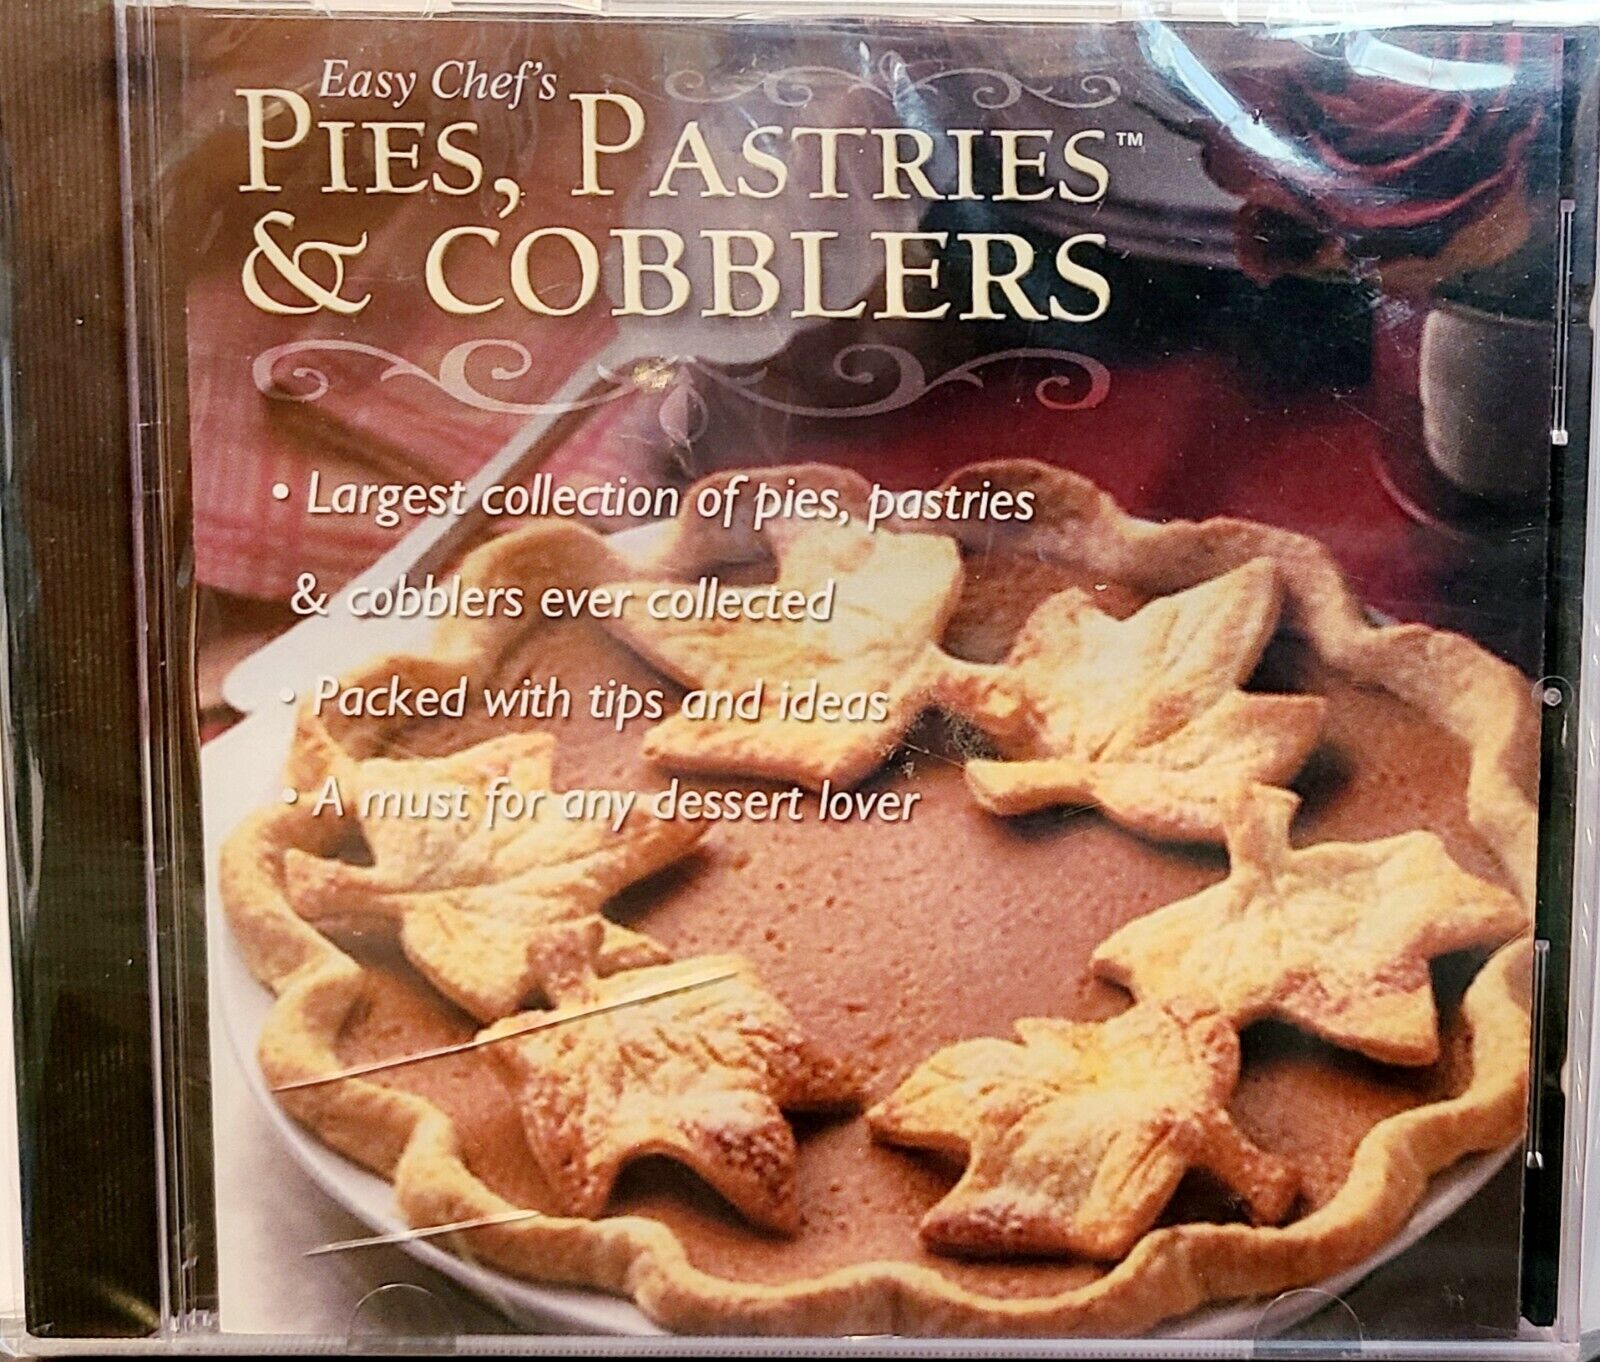 Easy Chef\'s: Pies, Pastries & Cobblers PC CD-ROM for Windows 